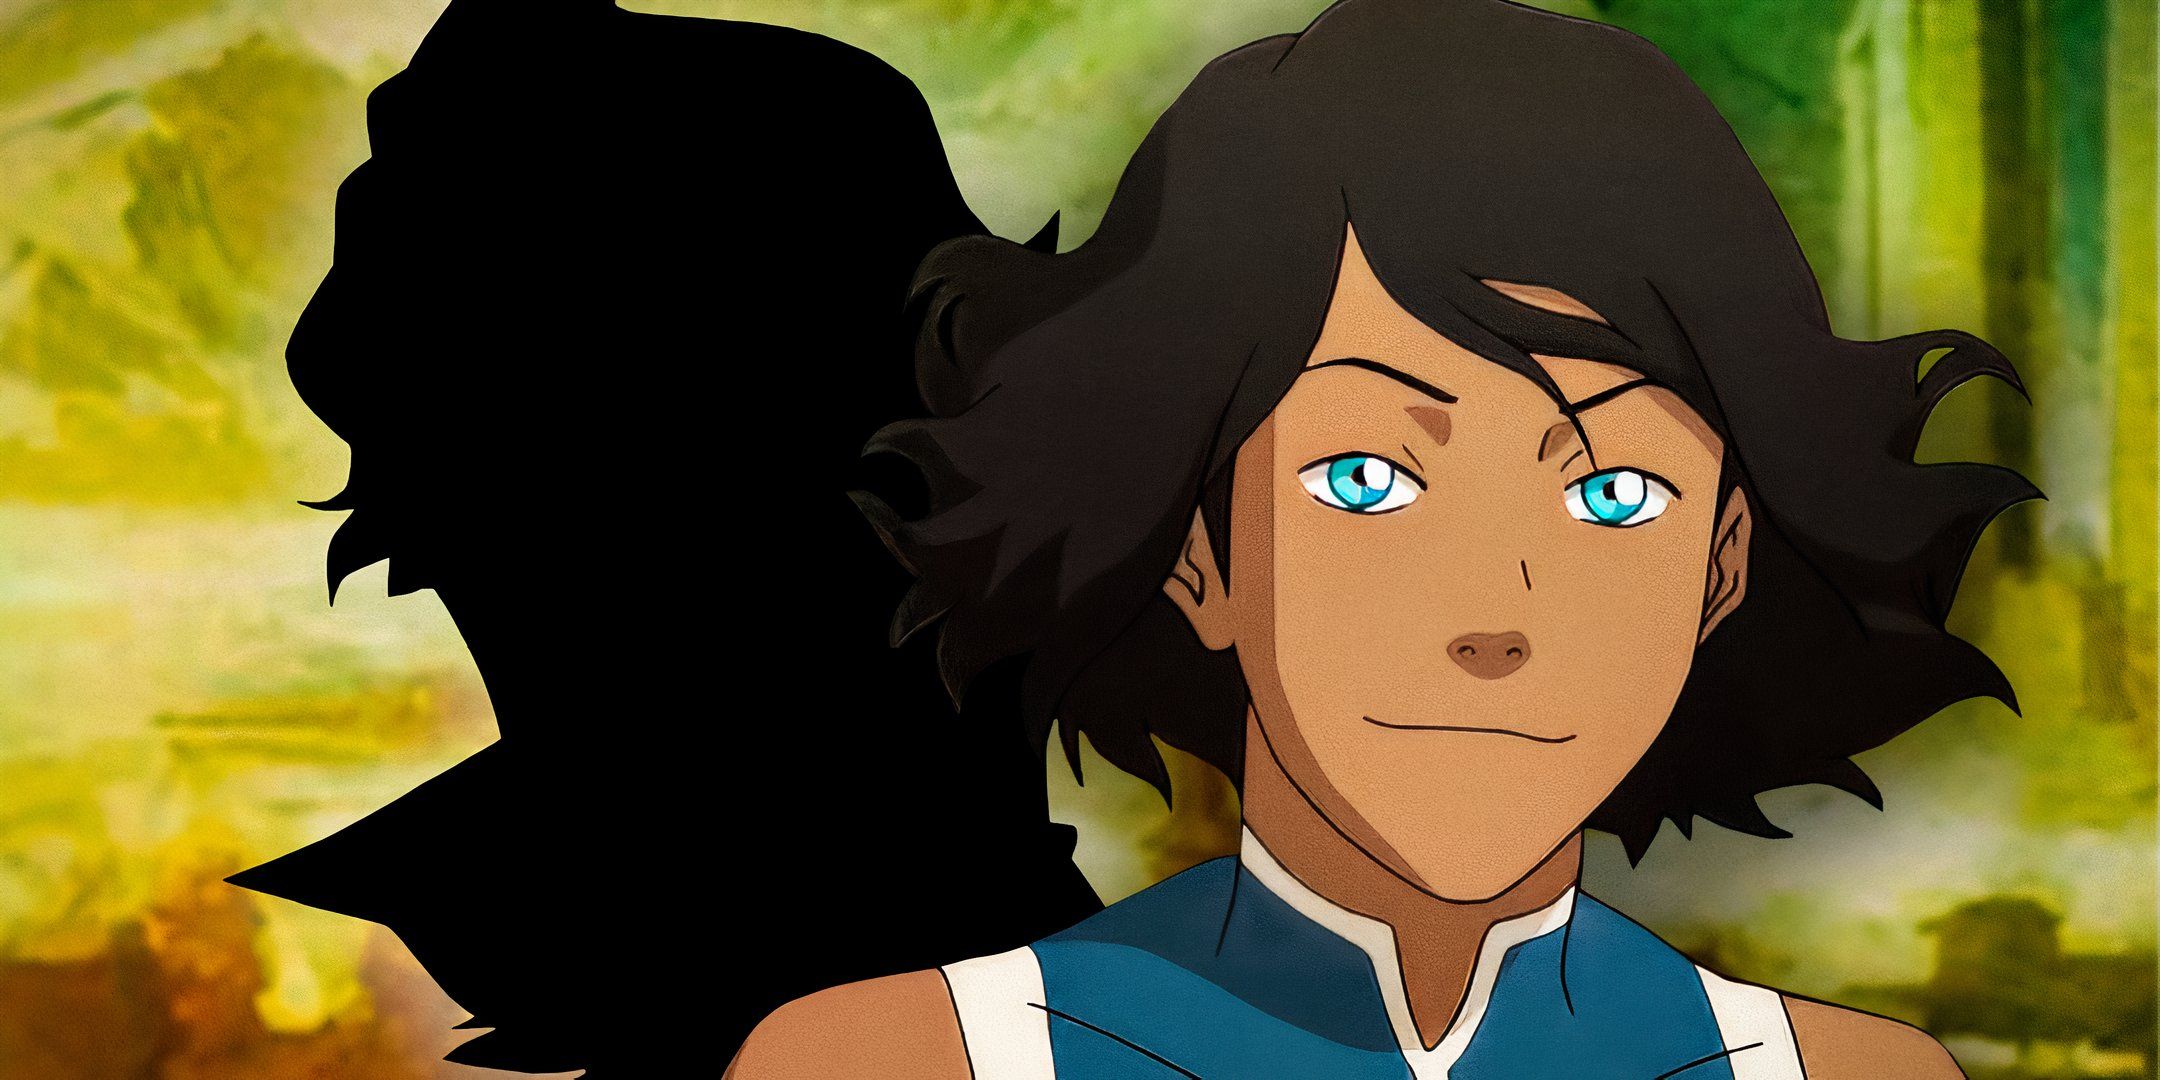 Korra in front of the silhouette of a character from The Legend of Korra